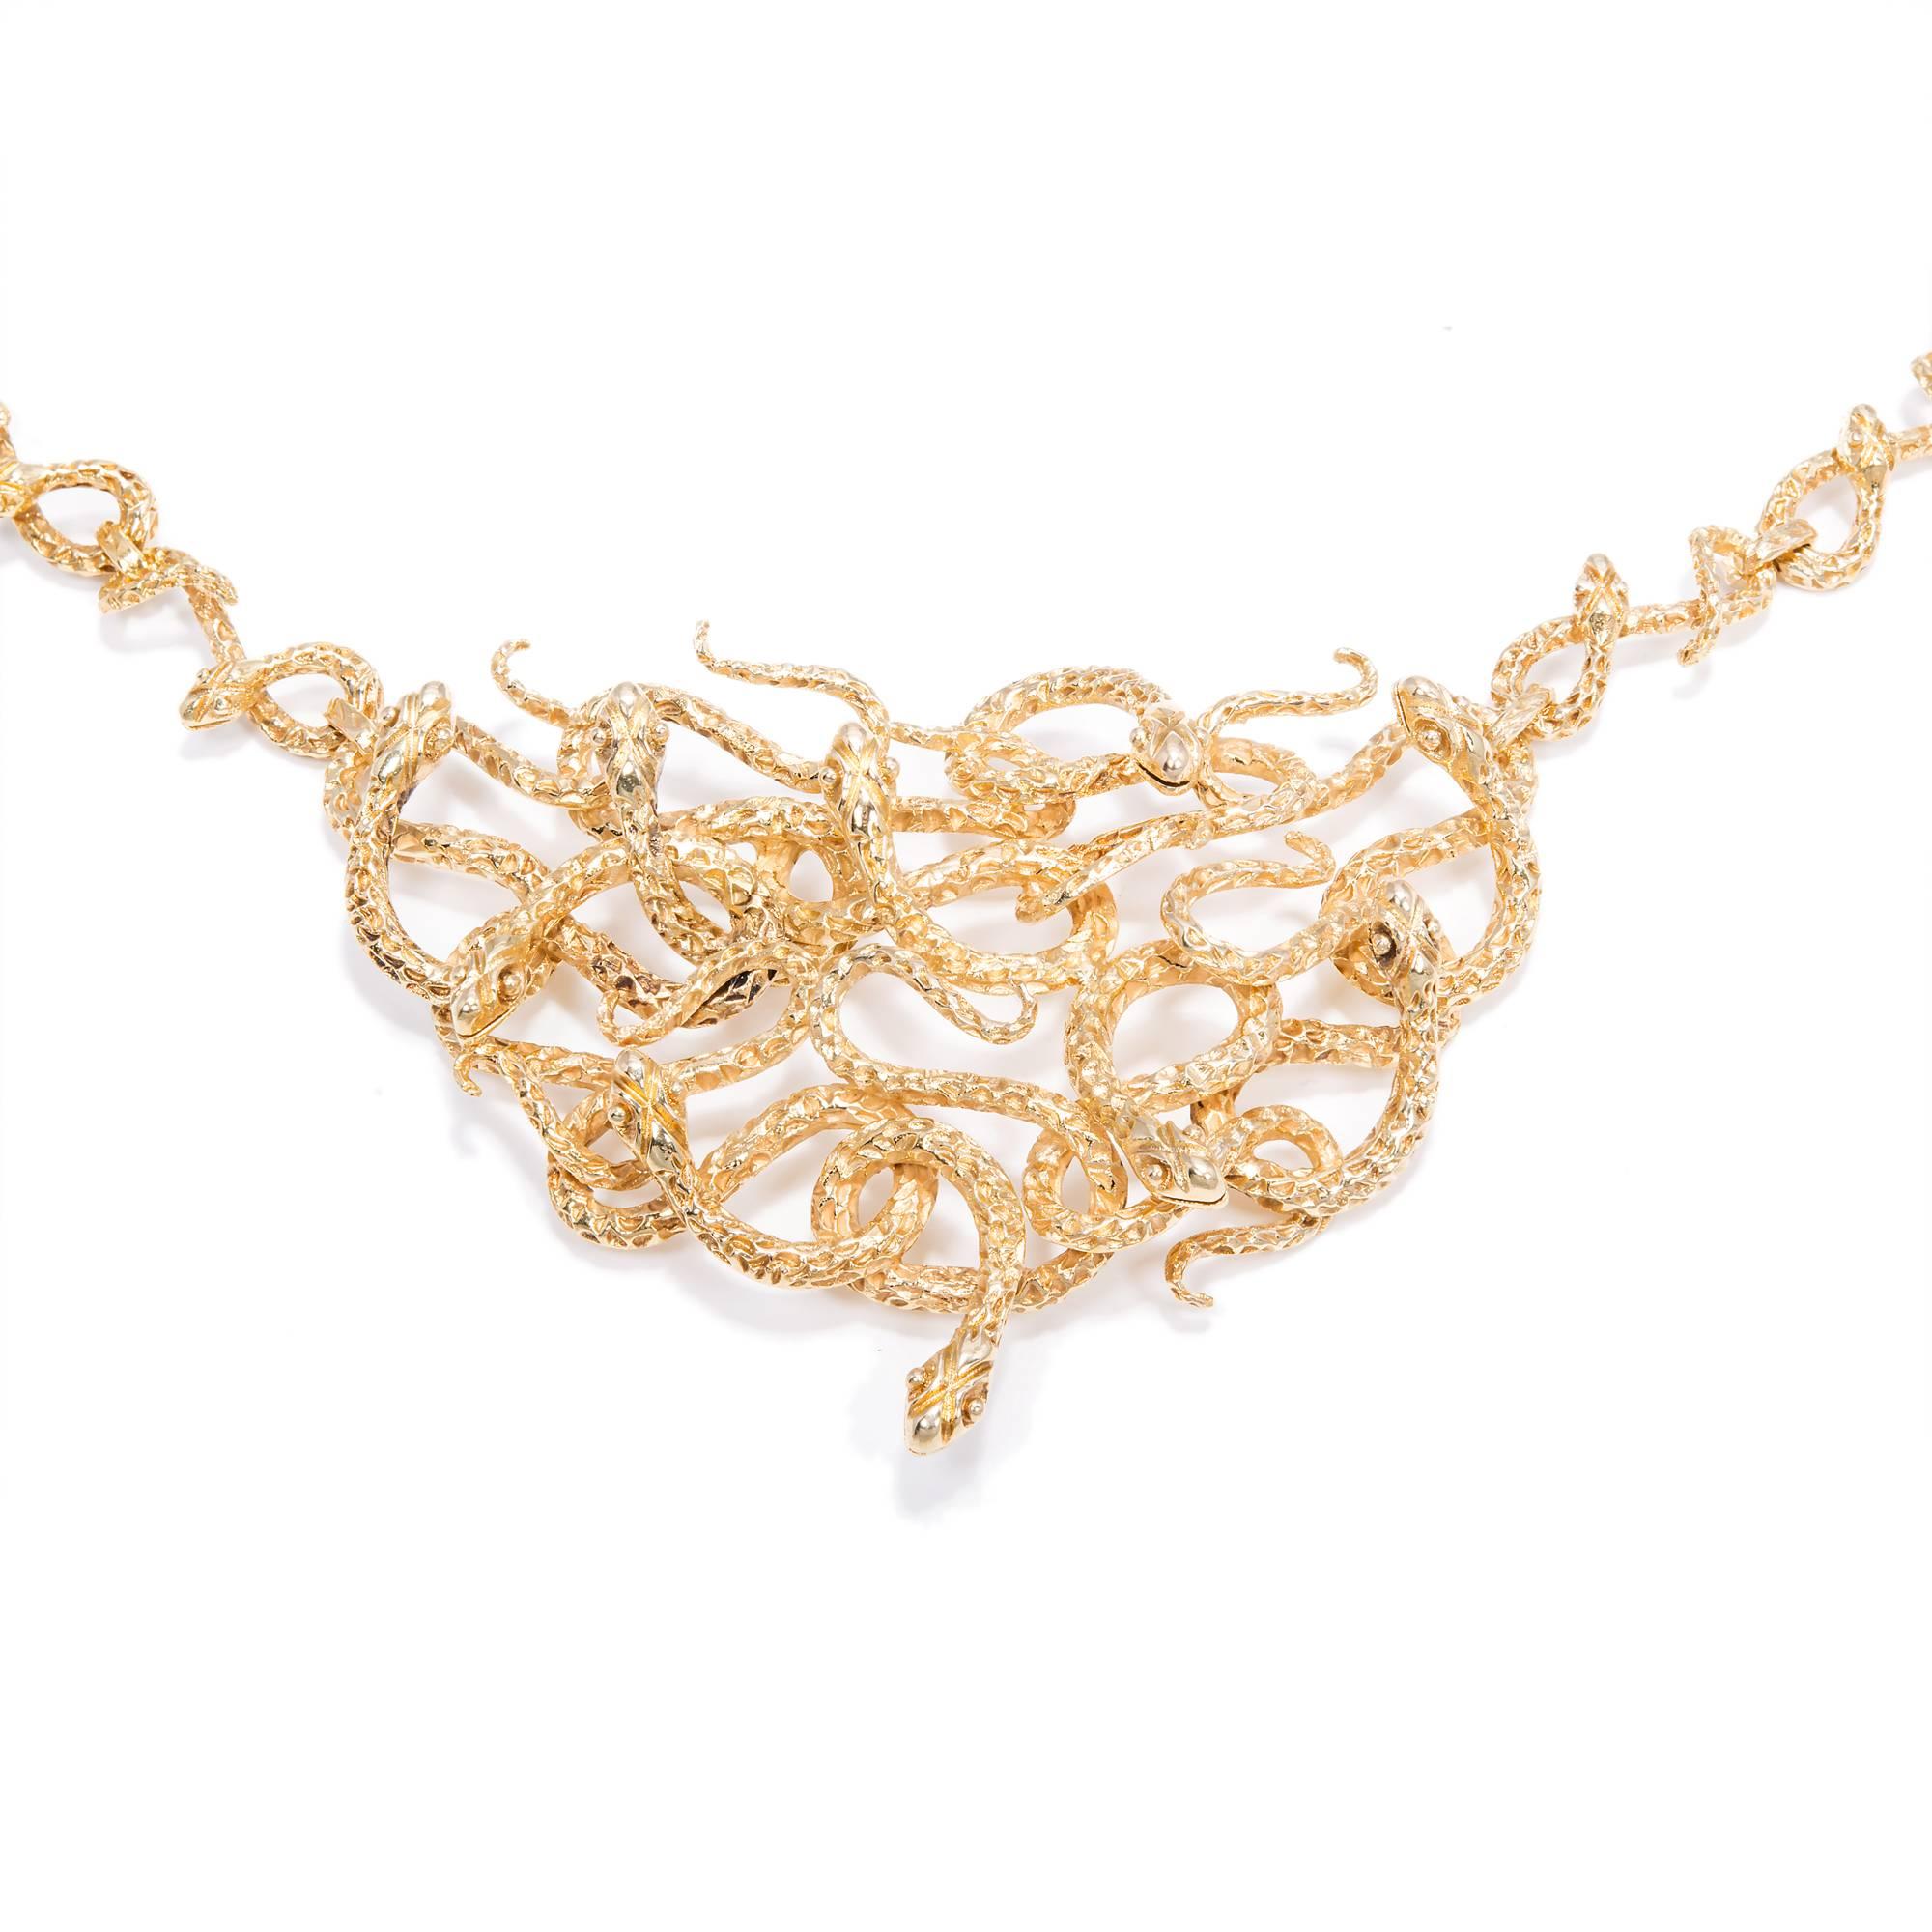 Mid-century Medusa intertwined snake necklace in solid 18k gold. Textured serpents. Both the center section and the entire chain are end to end snakes.

18k yellow gold
Tested: 18k
Stamped: 750
Hallmark: 838
76.4 grams
Center section top to